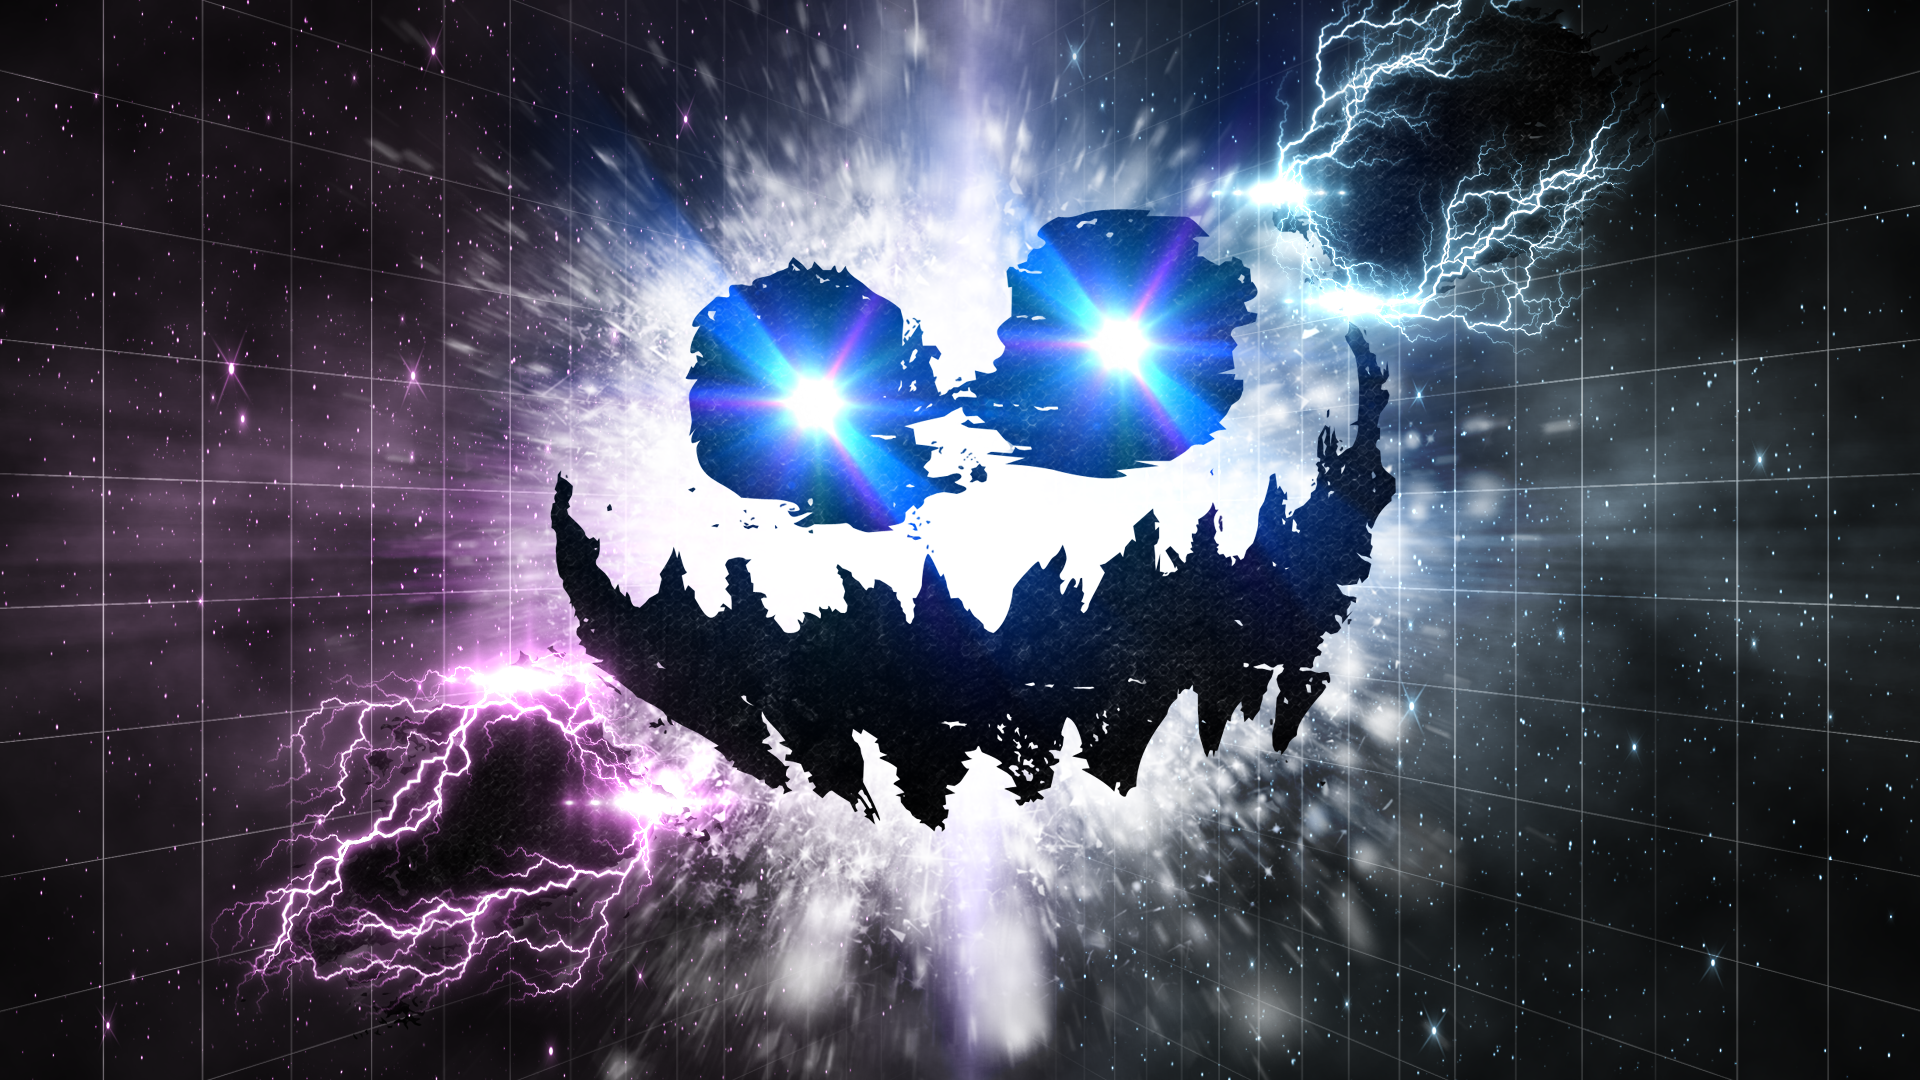 Knife Party Wallpaper